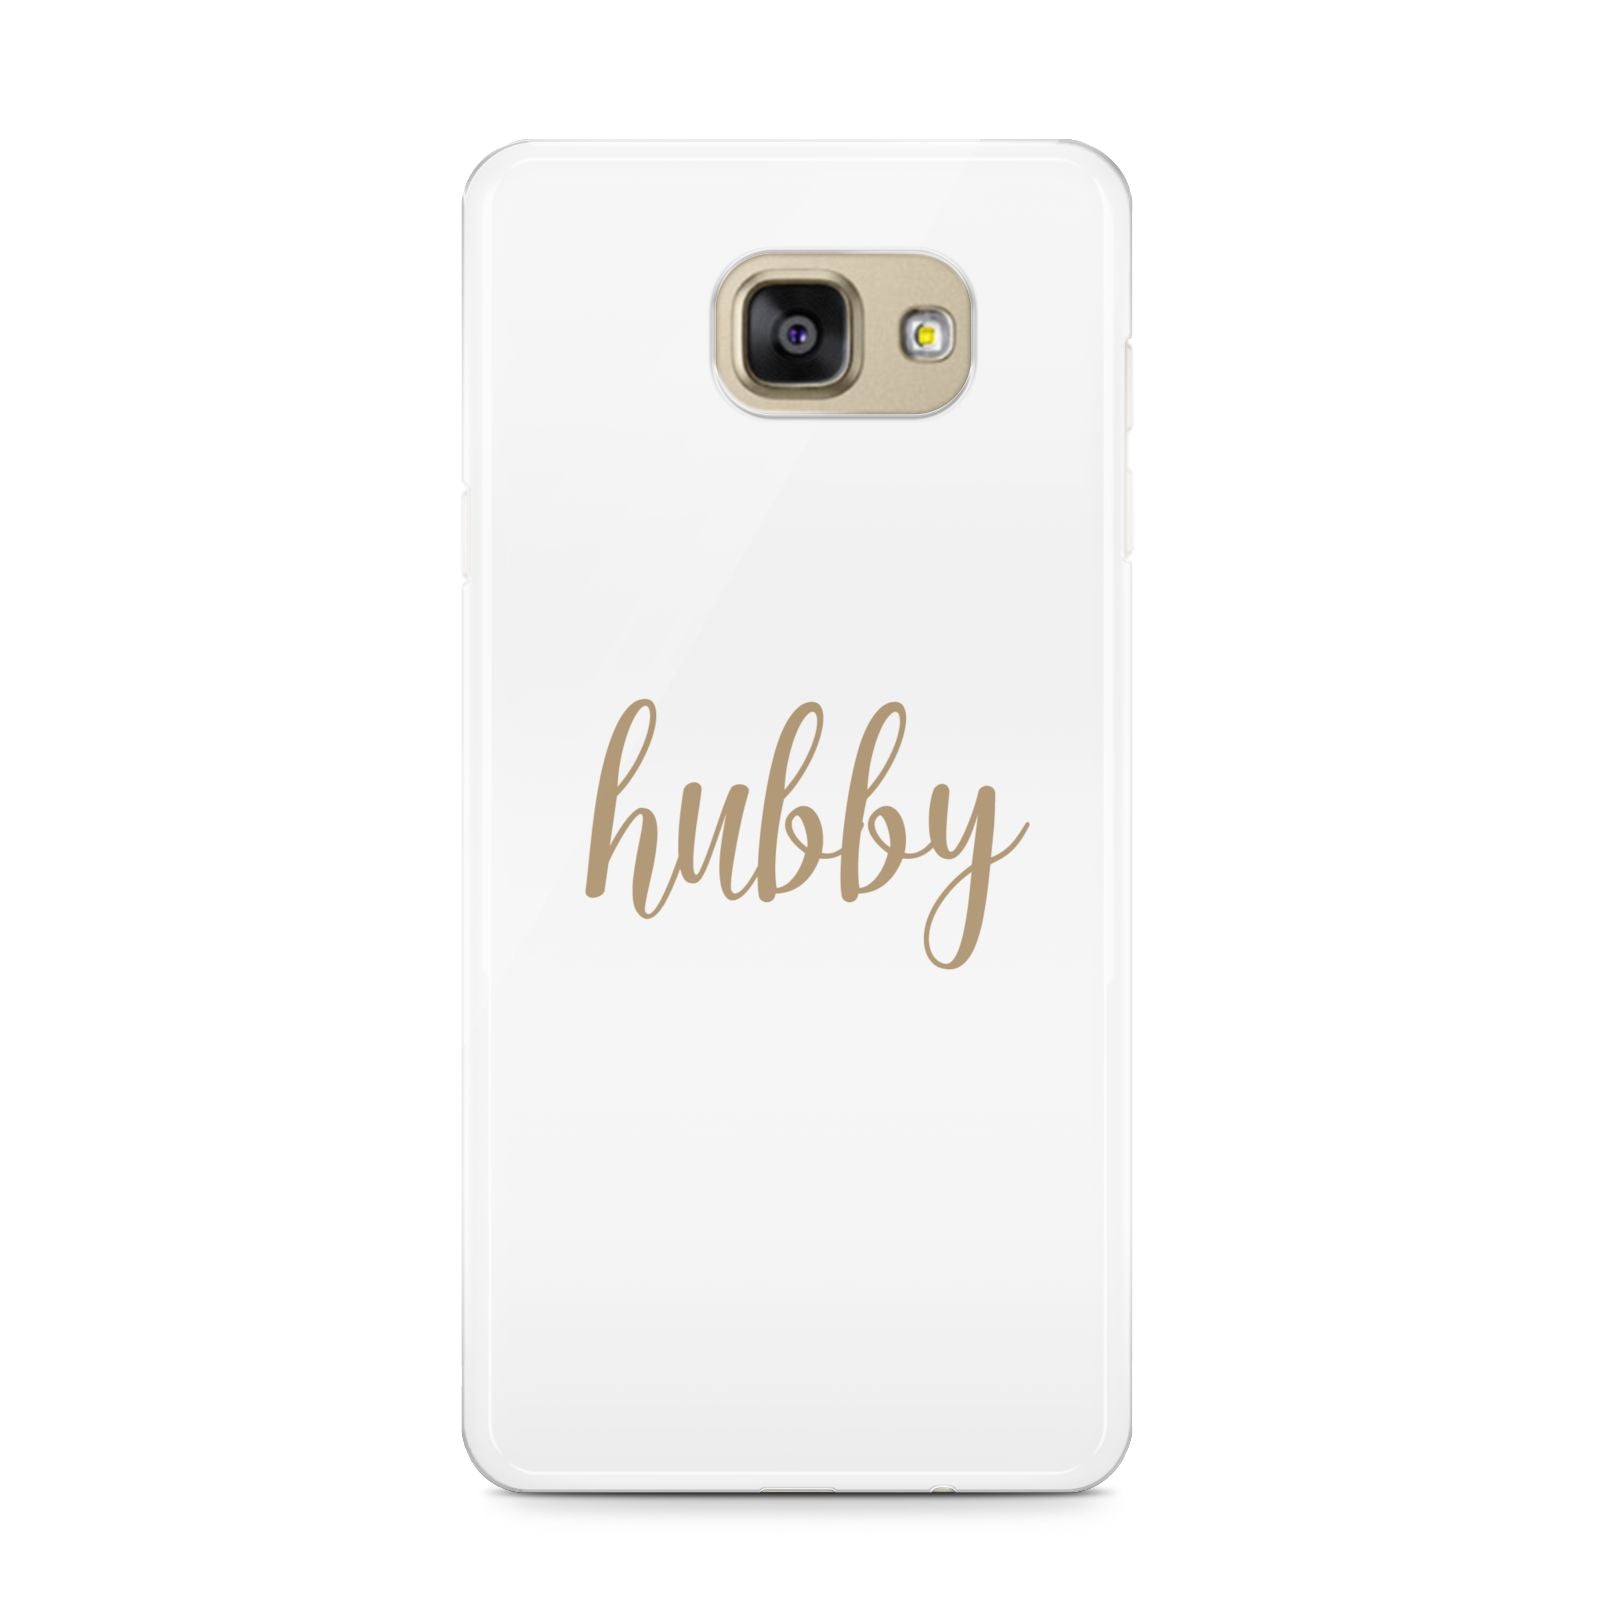 Hubby Samsung Galaxy A9 2016 Case on gold phone